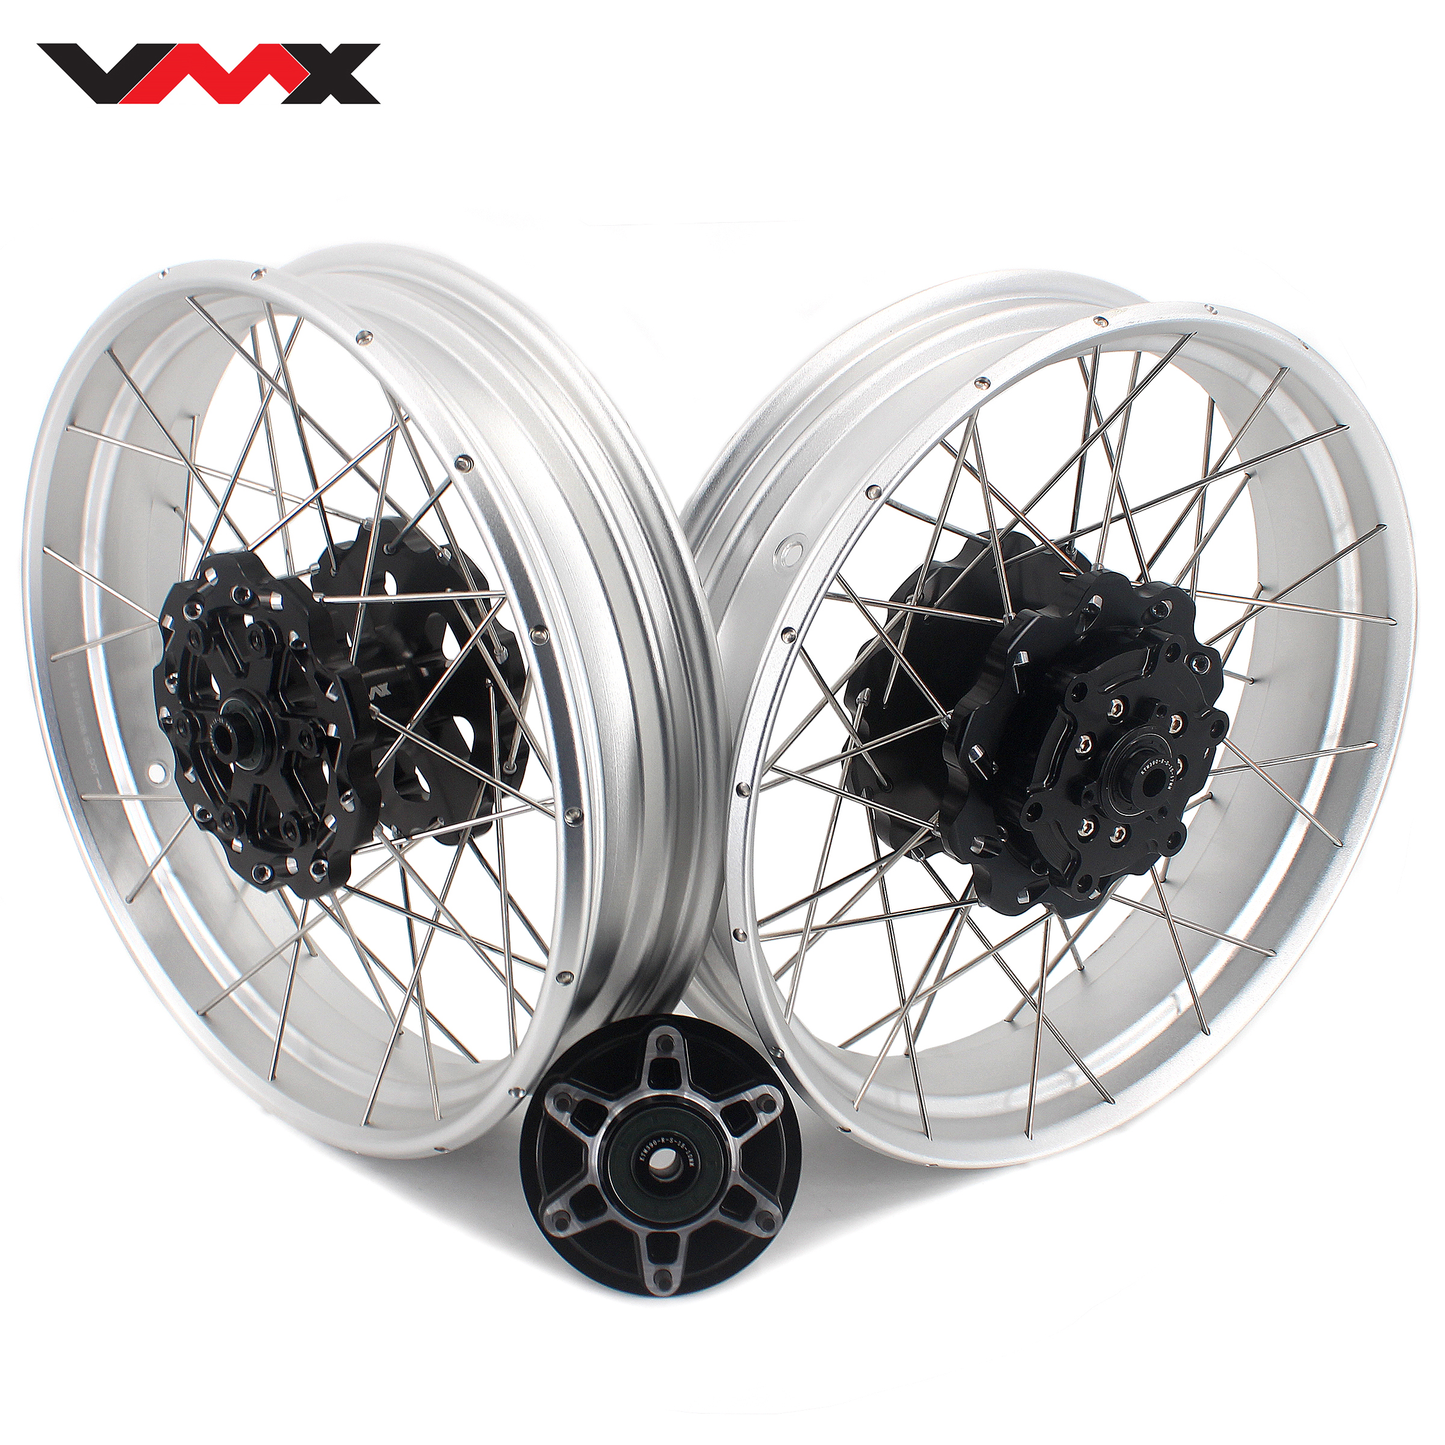 VMX 2.5*19inch / 3.5*17inch Spoked Tubeless Wheels Rims For KTM390 Adventure 2020-2021